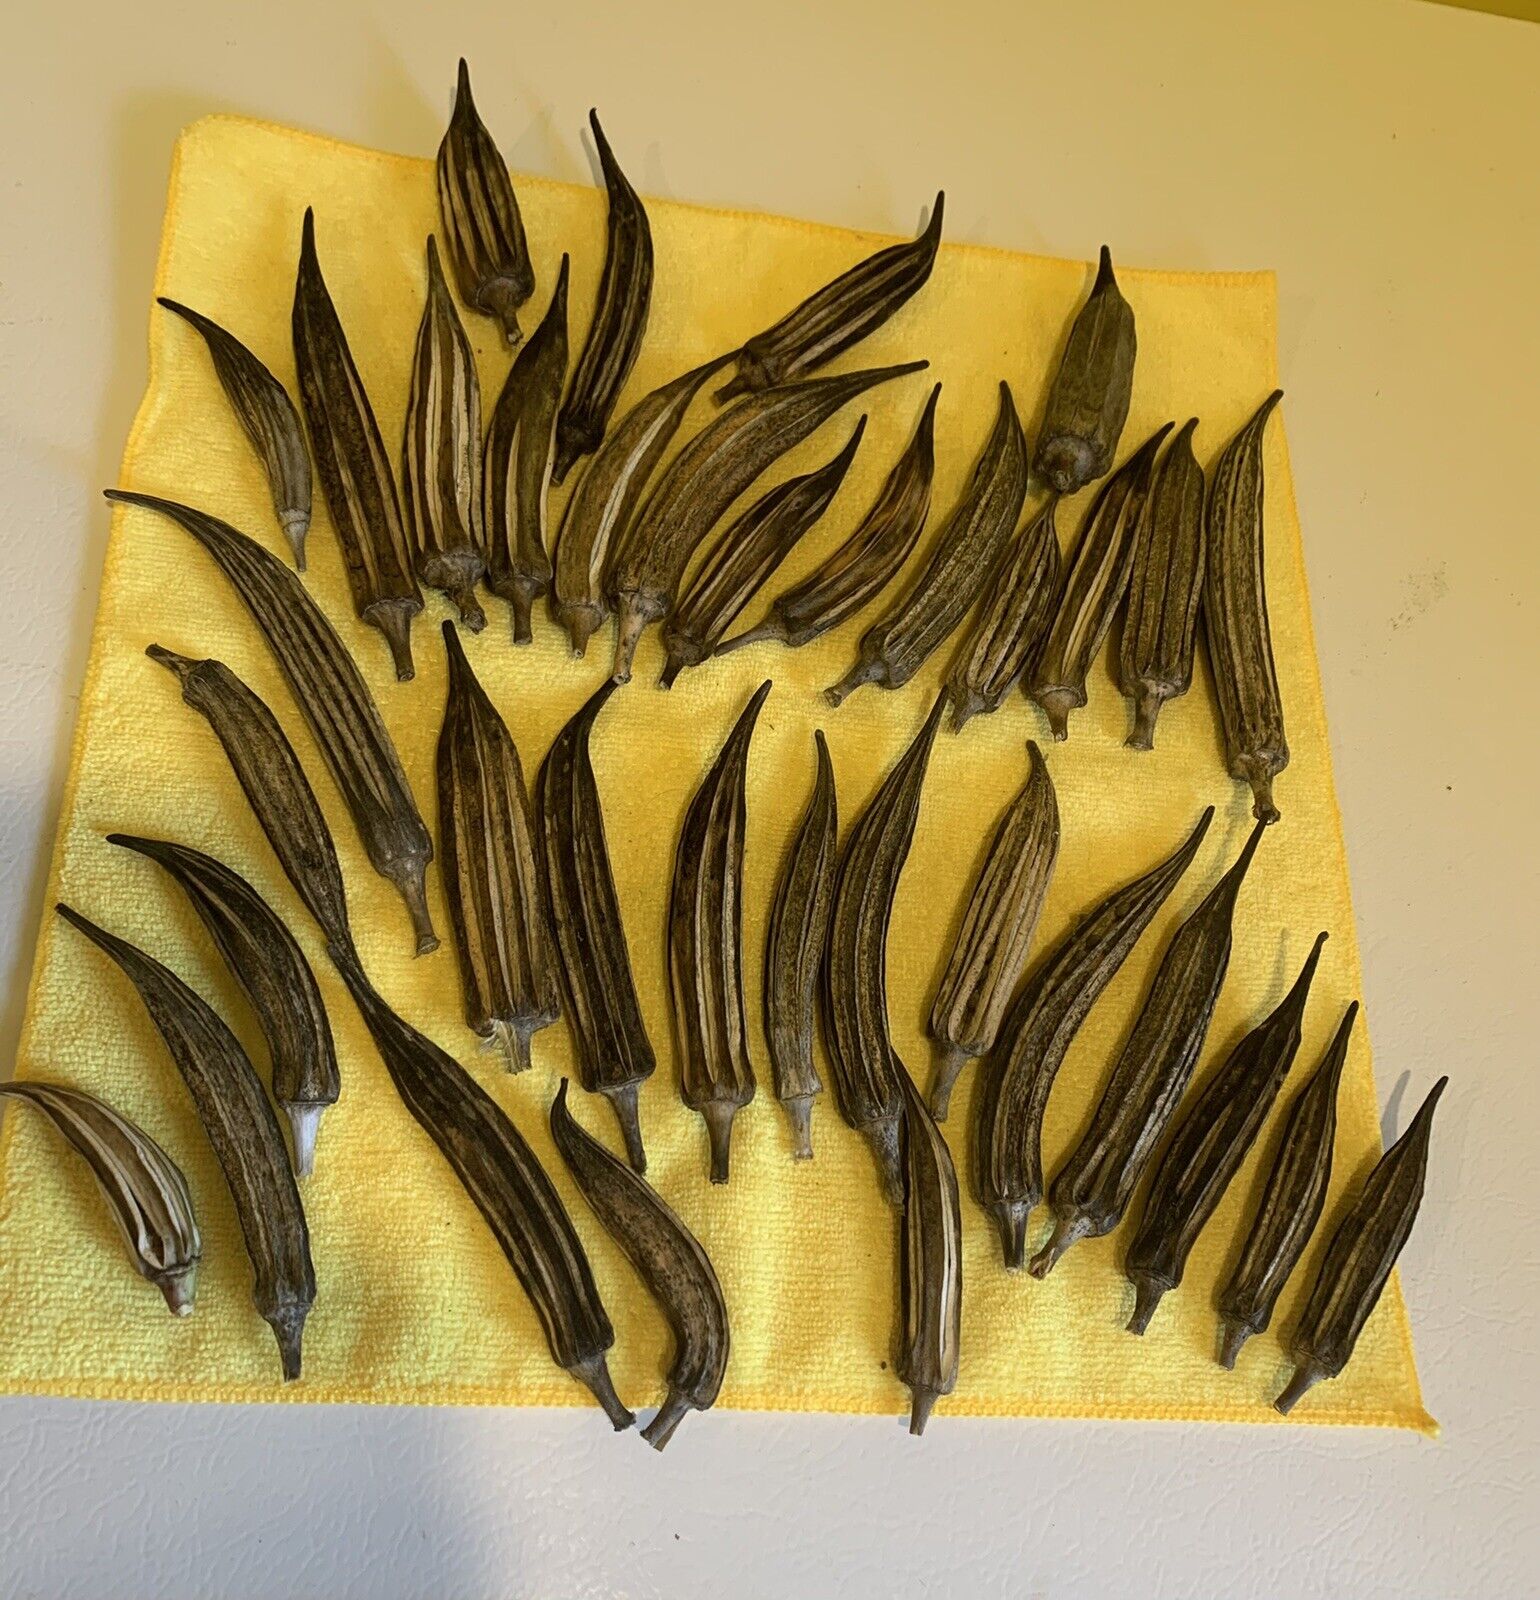 36 Pieces Dried Okra Pods Great For Arts And Crafts Or Floral Decorating